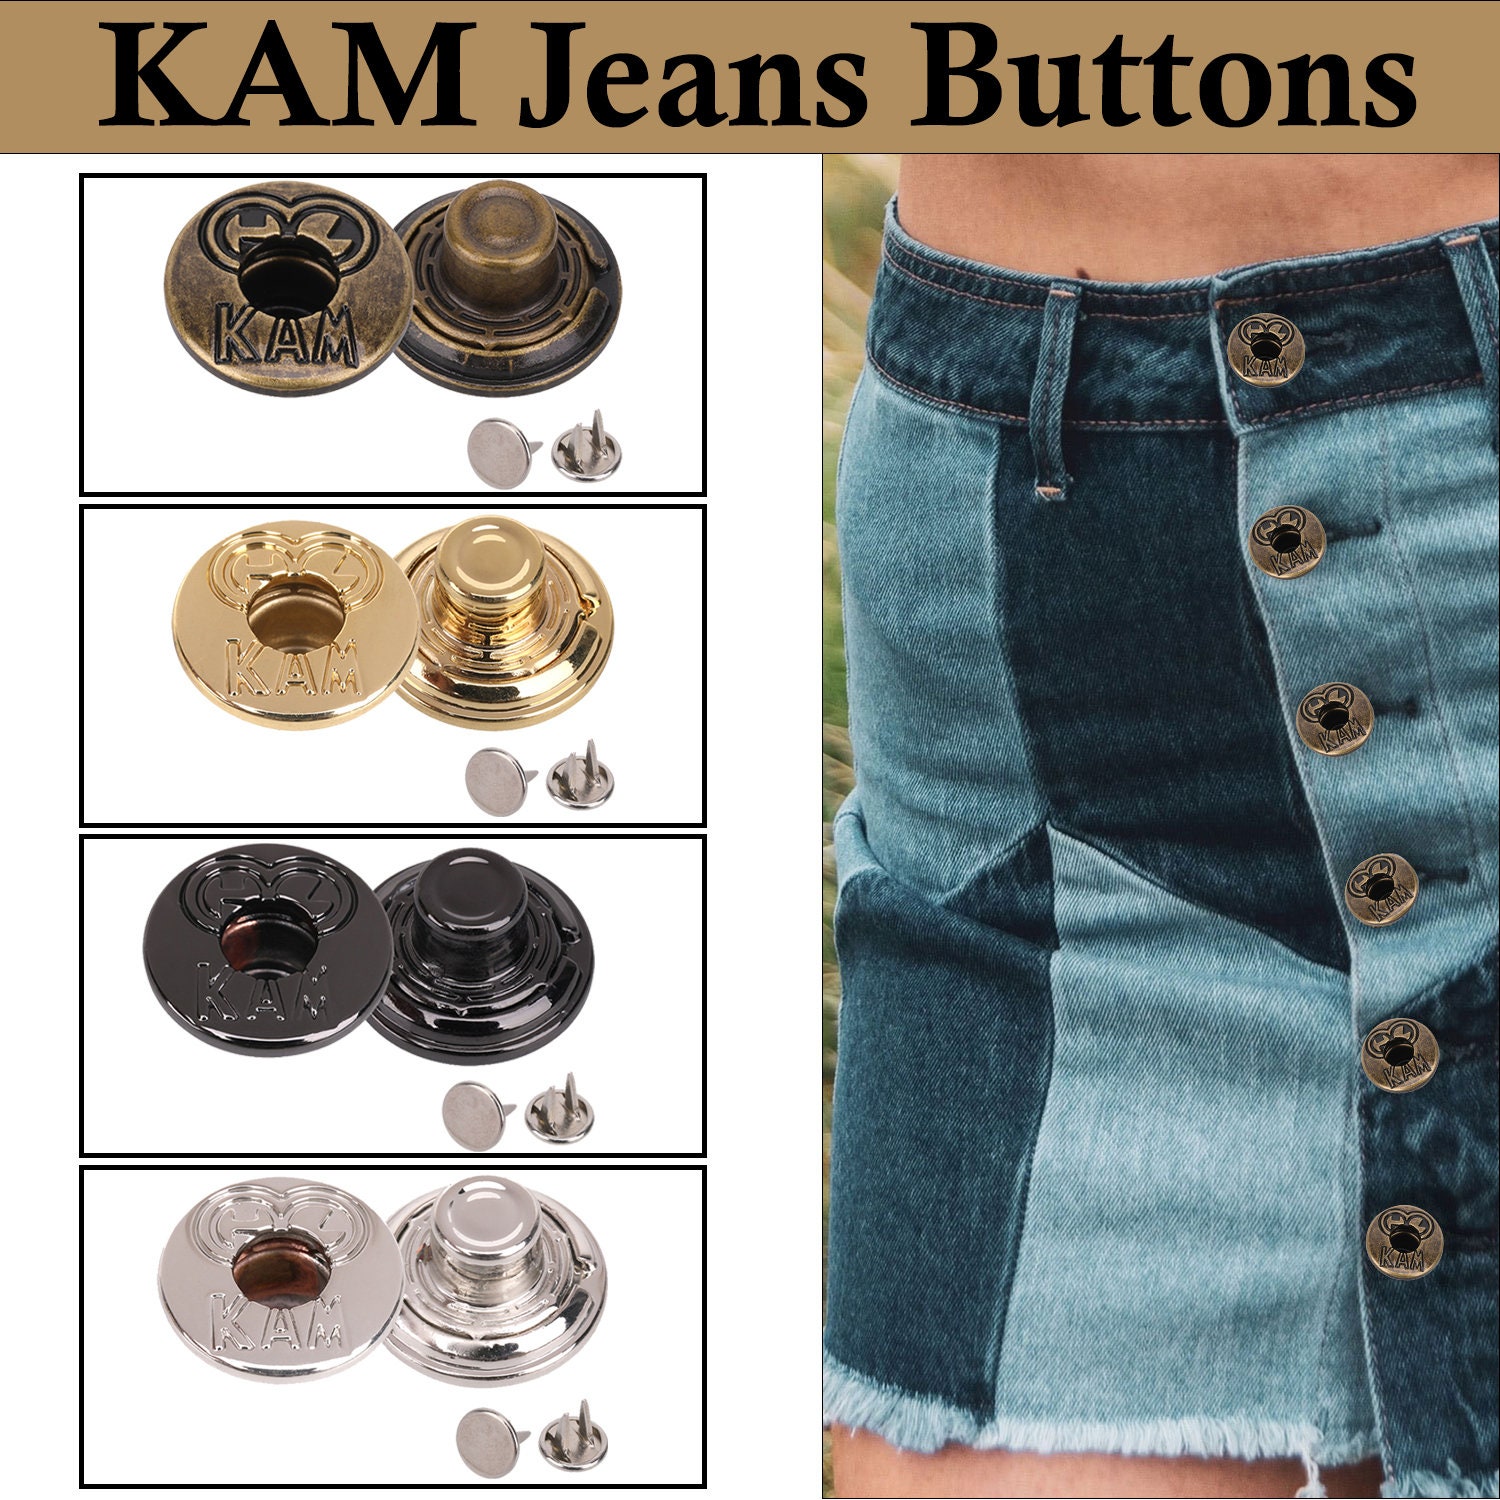 KAM 17mm Jeans Buttons No Sew Jean Button Replacement Metal Jeans Button  With Pins Reusable for Clothing Repair, Denim, Jeans, Jackets, Bags 